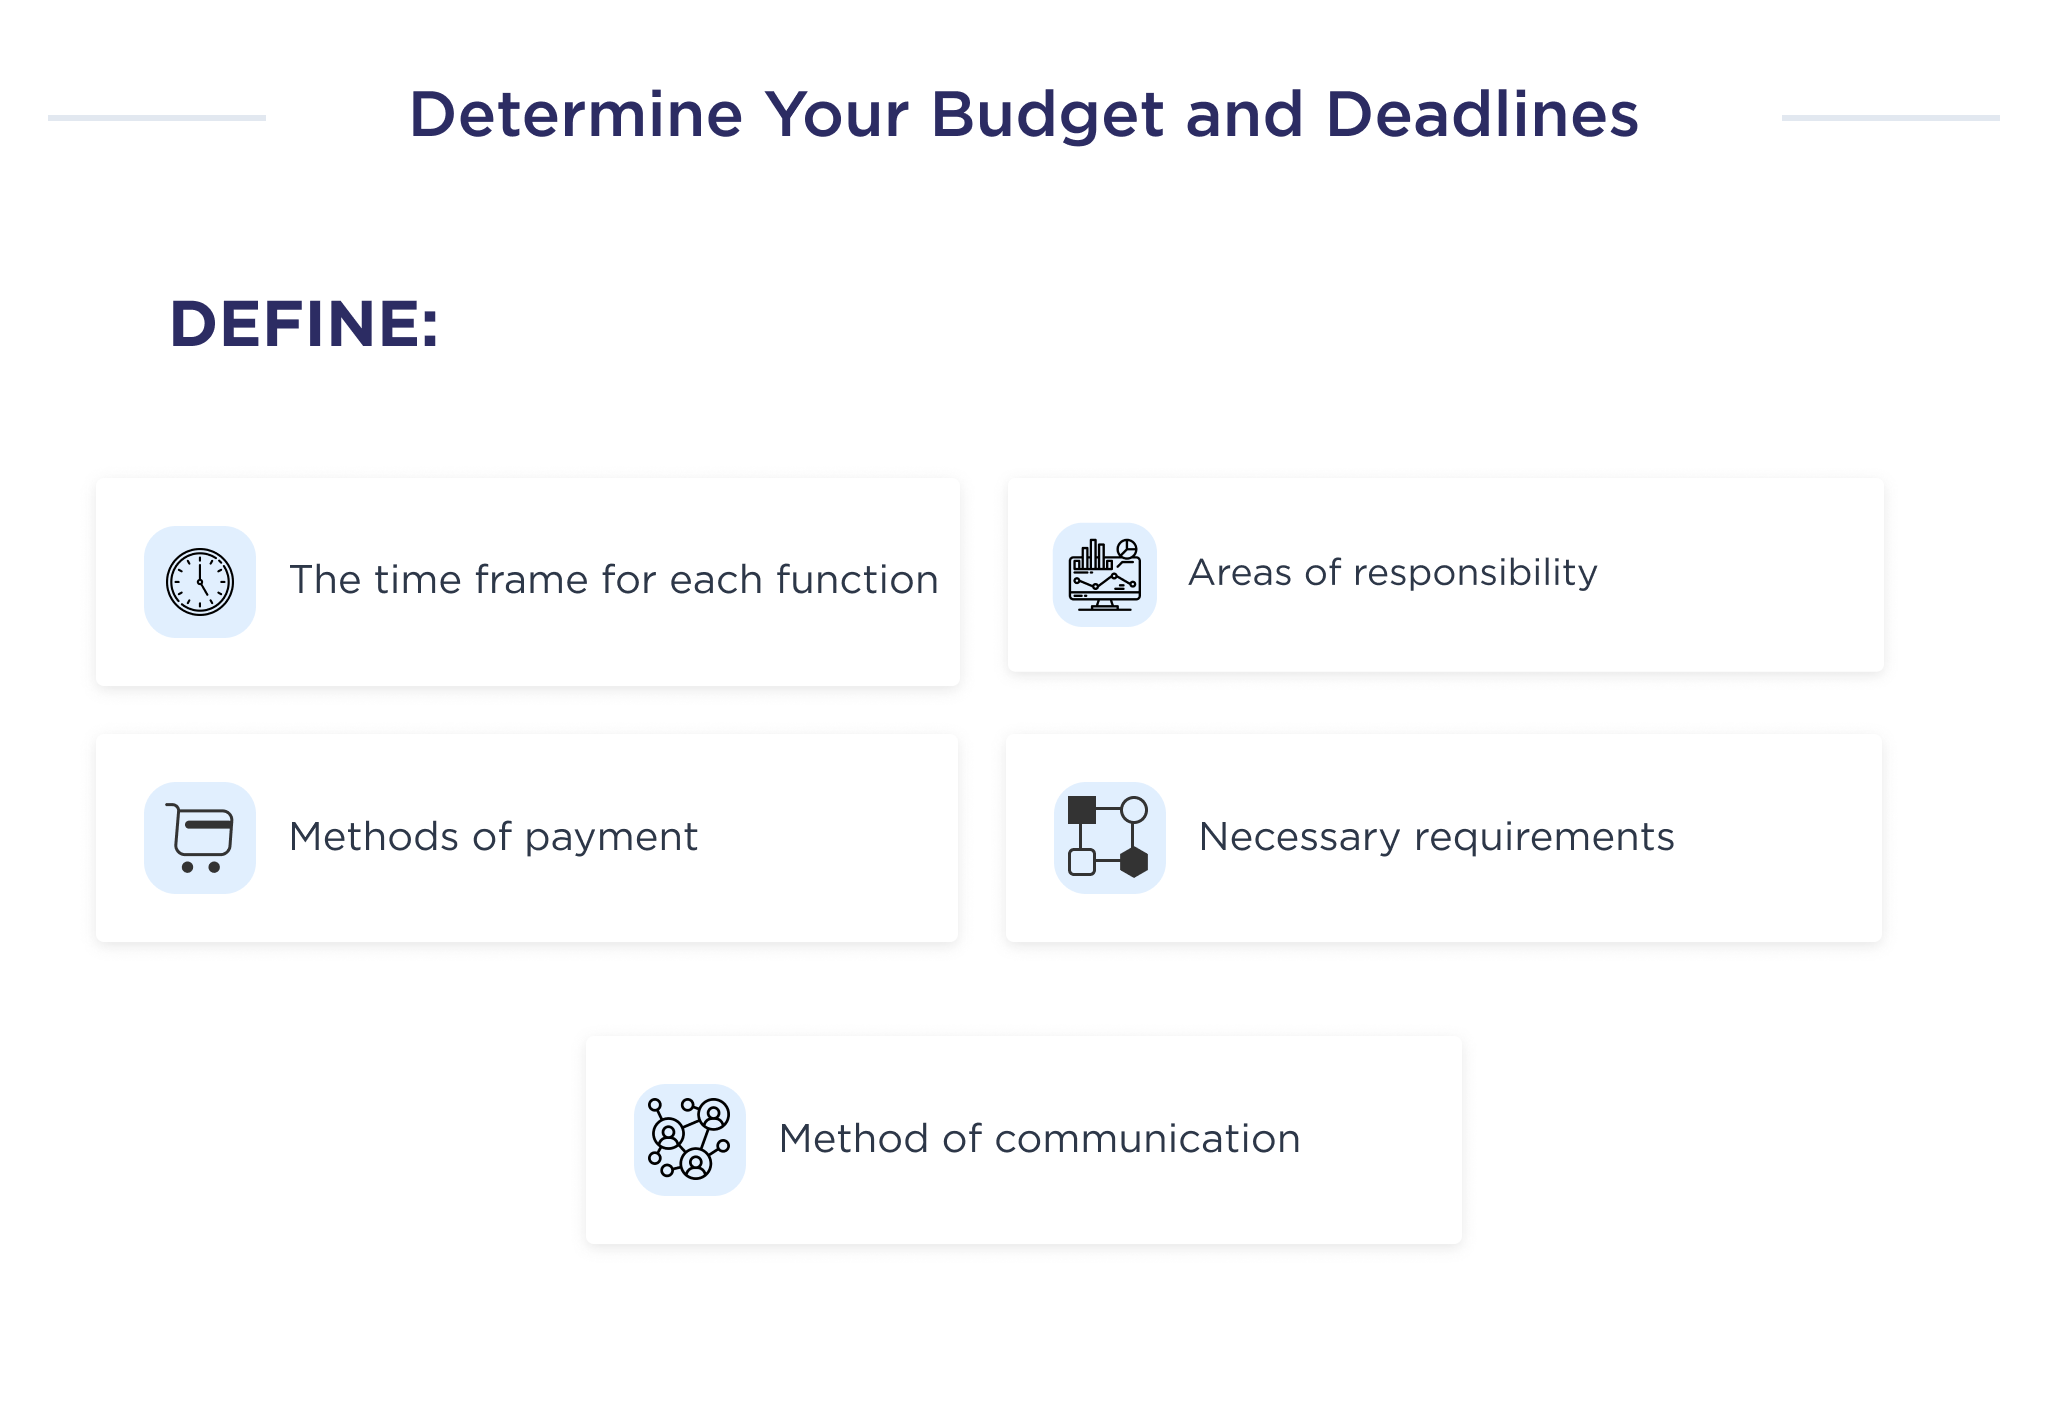 The illustration shows the main factors what should be included in the budget and timeline of the offshore team you will work with to develop software